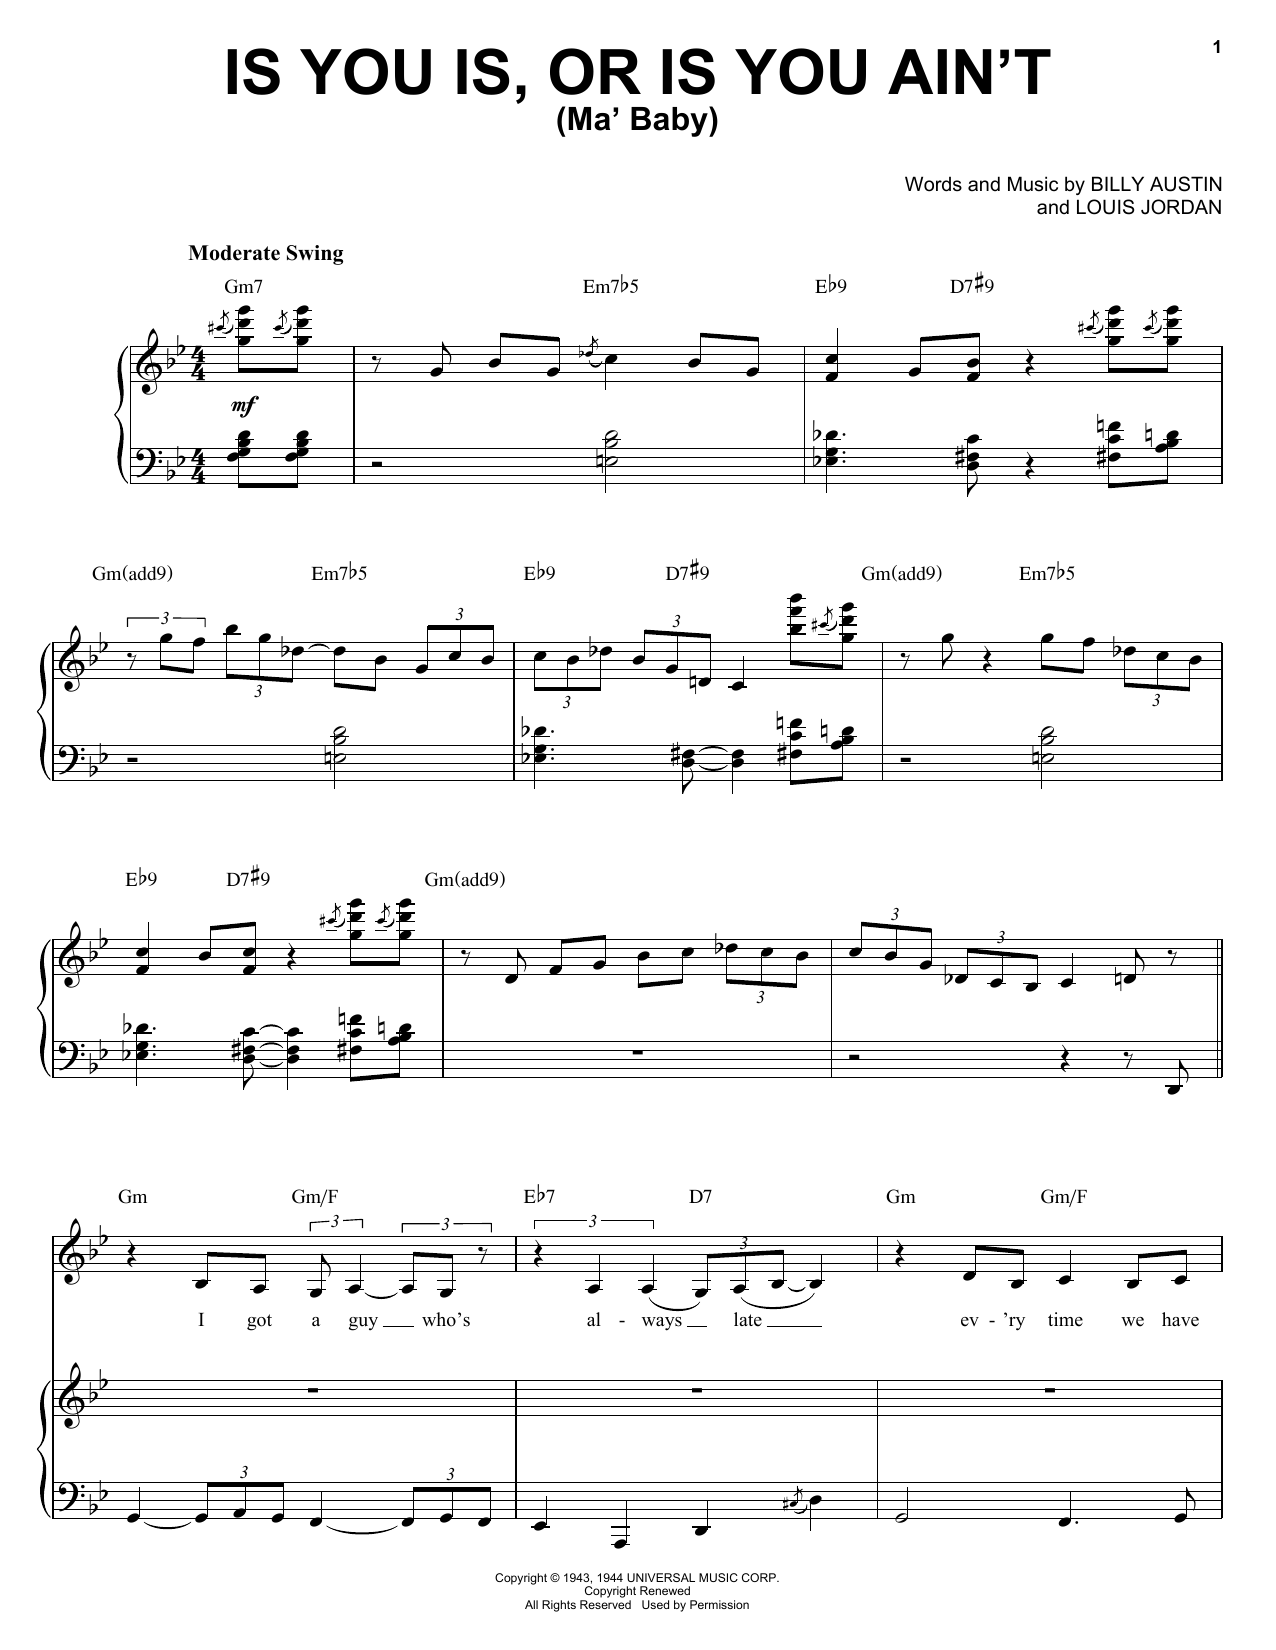 Download Diana Krall Is You Is, Or Is You Ain't (Ma' Baby) Sheet Music